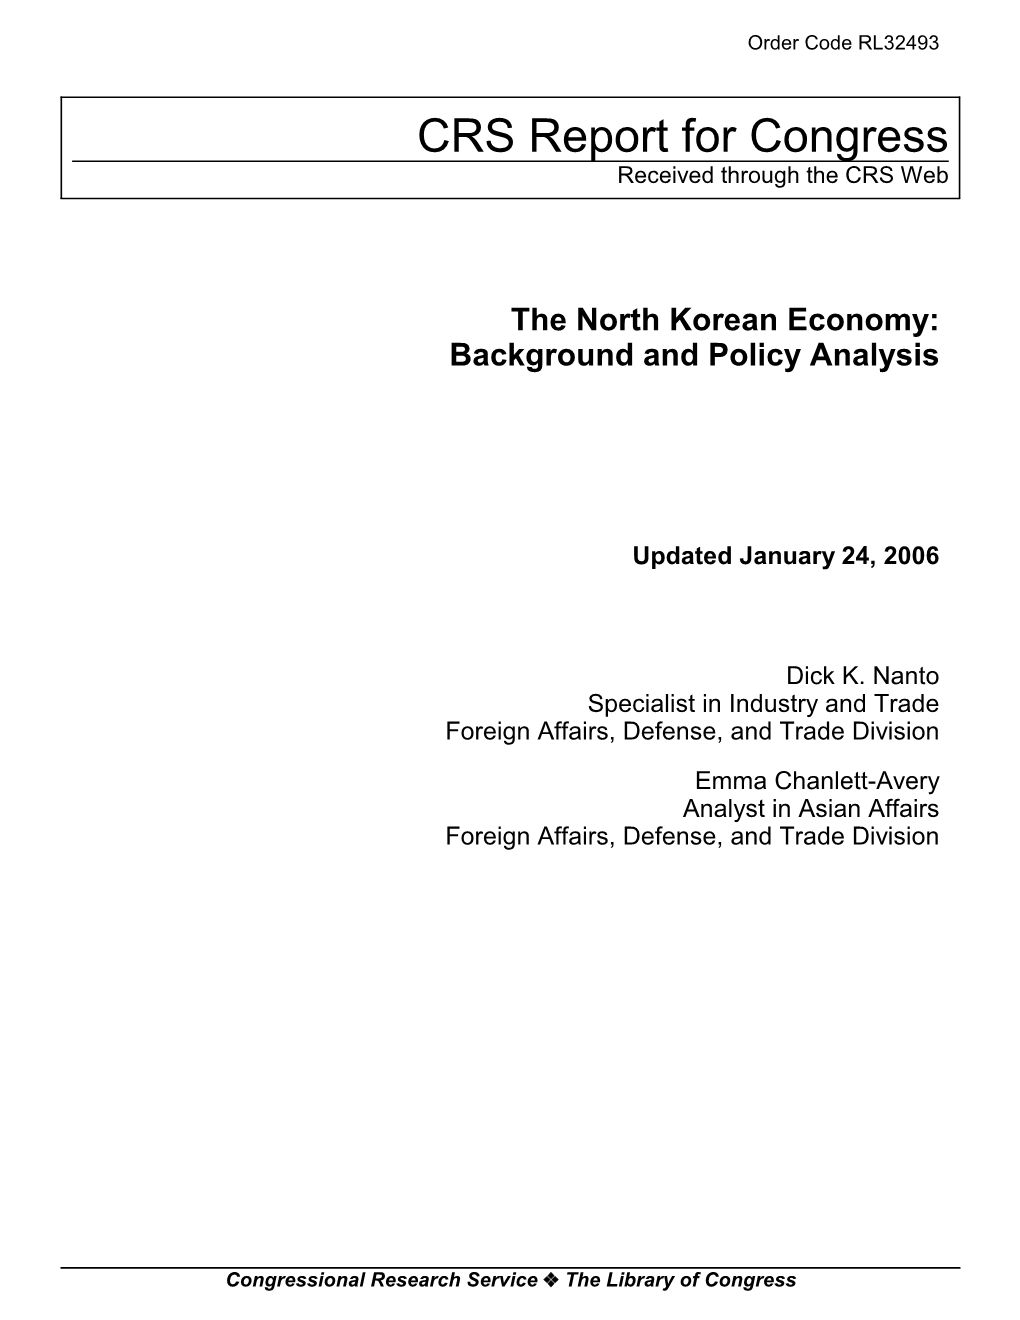 The North Korean Economy: Background and Policy Analysis